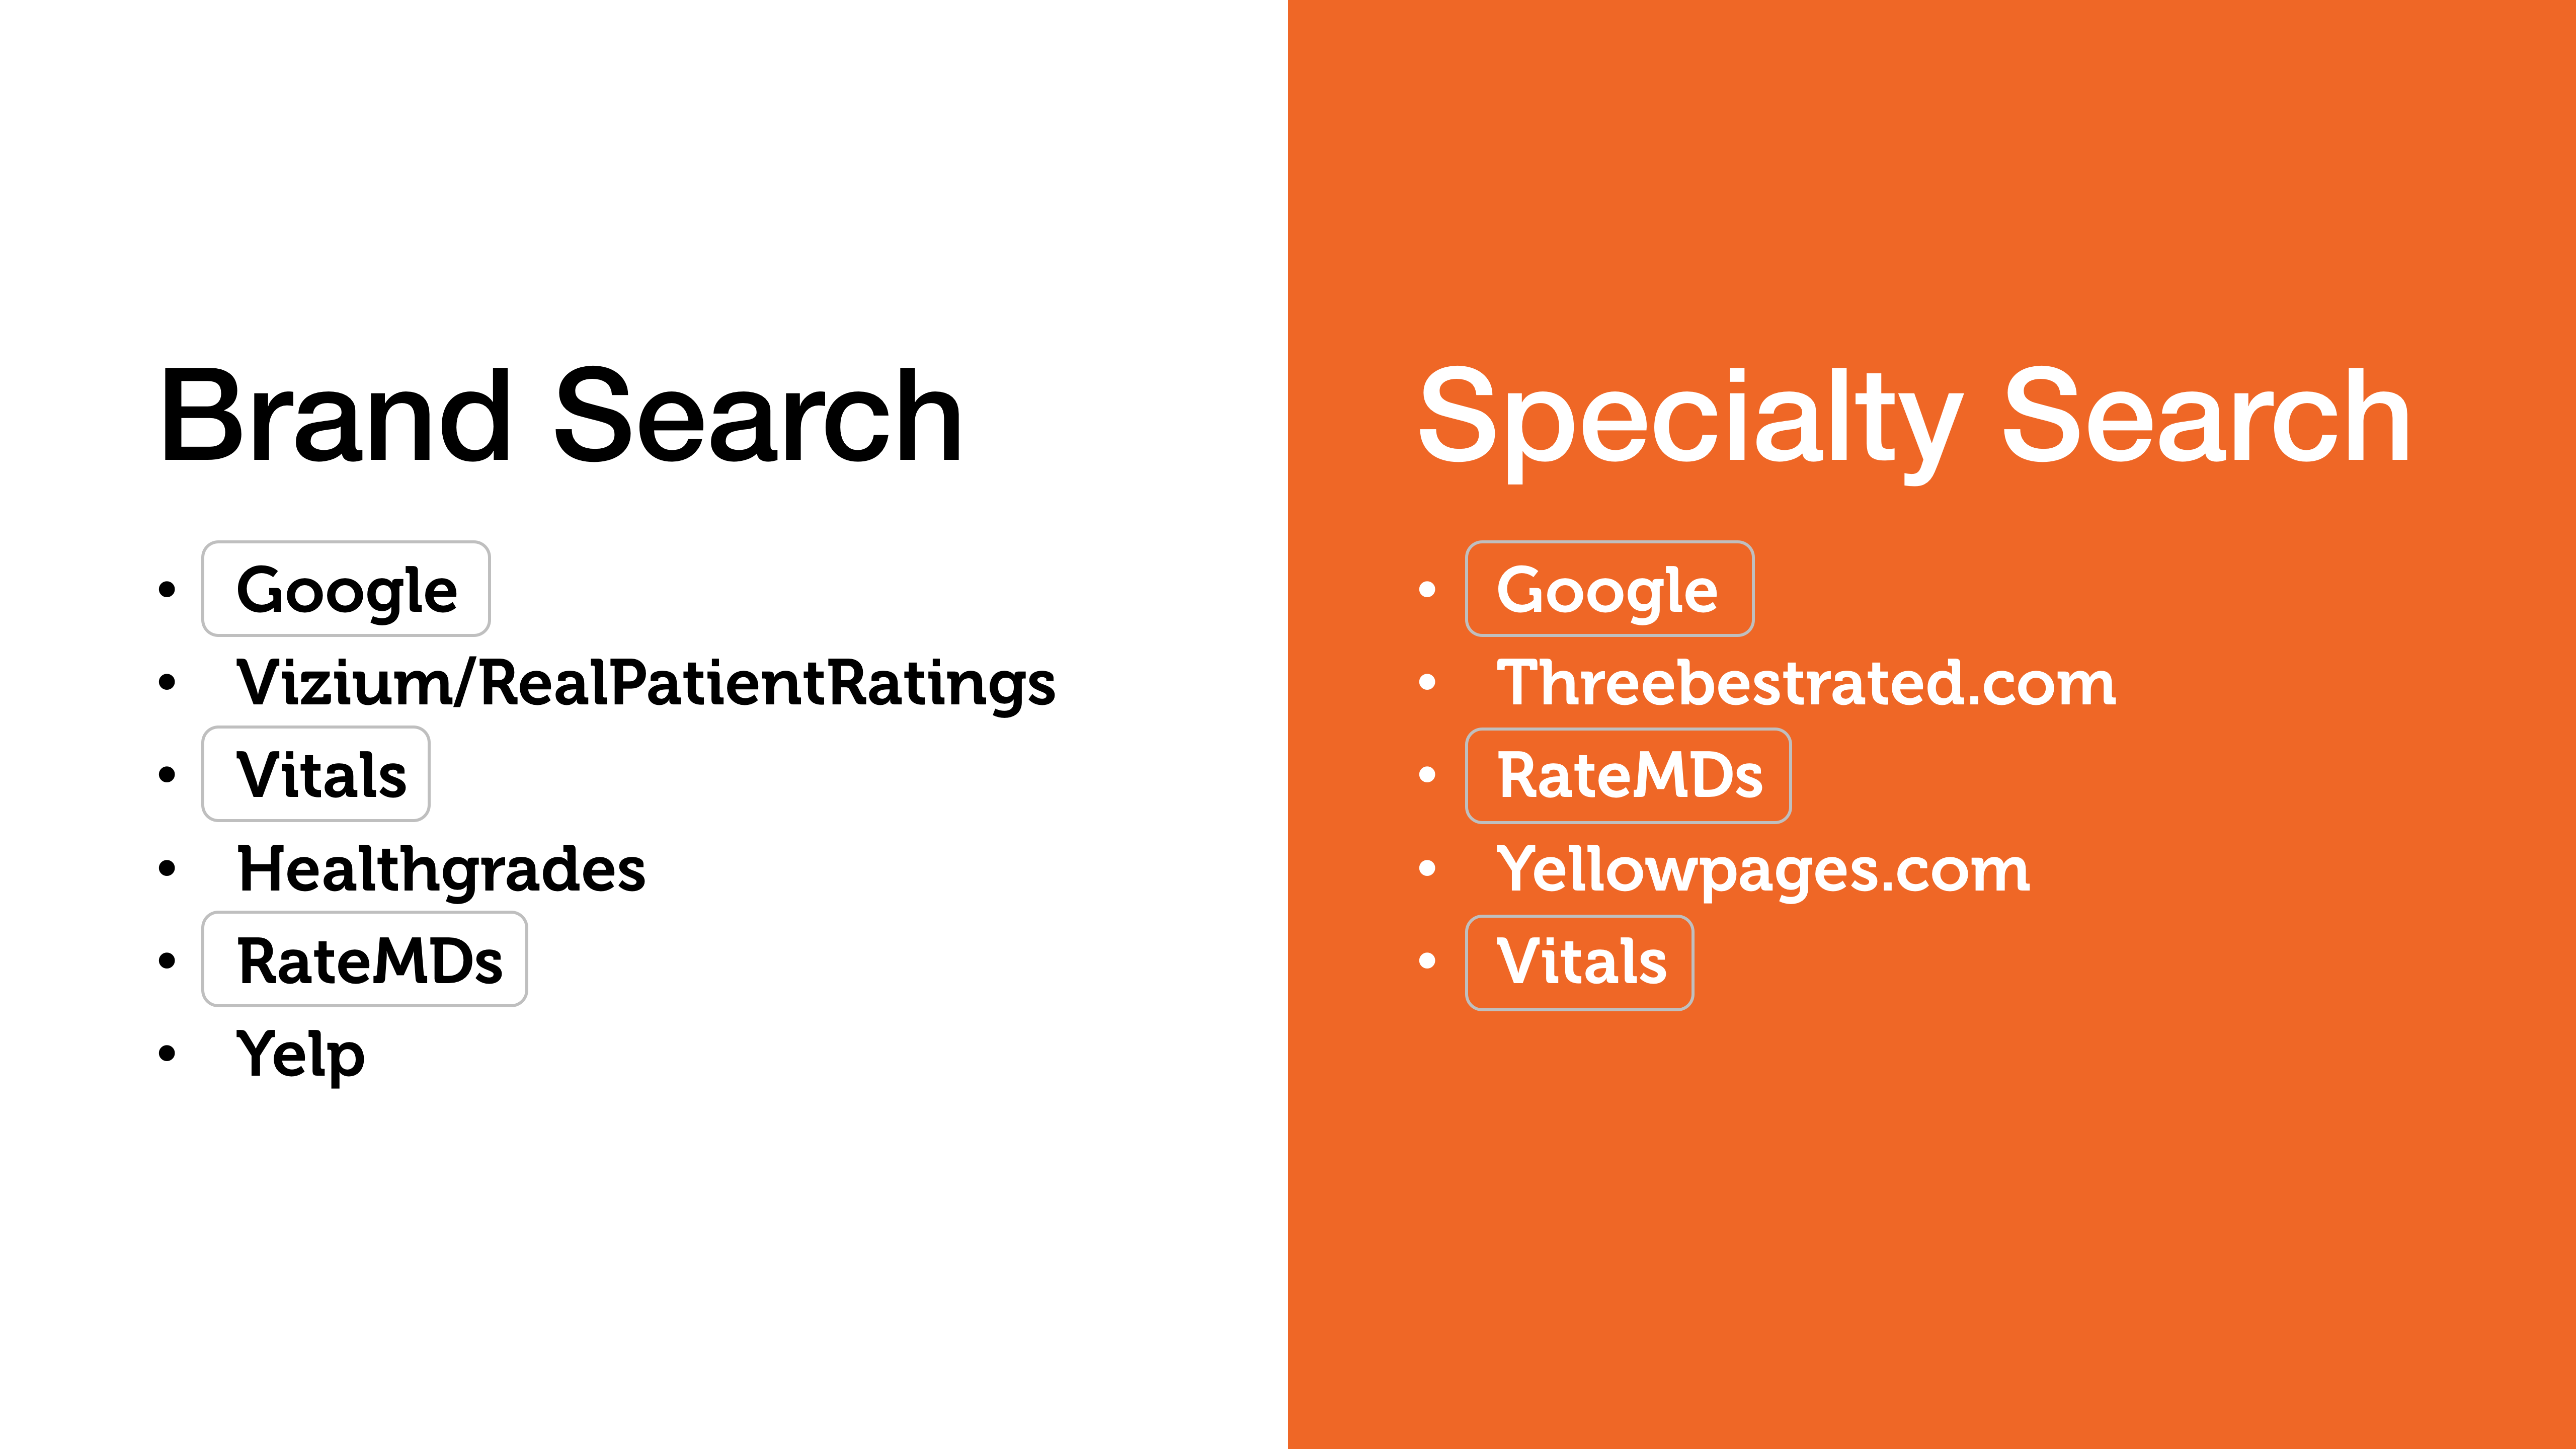 Target review sites found in search for the best for a specific practice. 